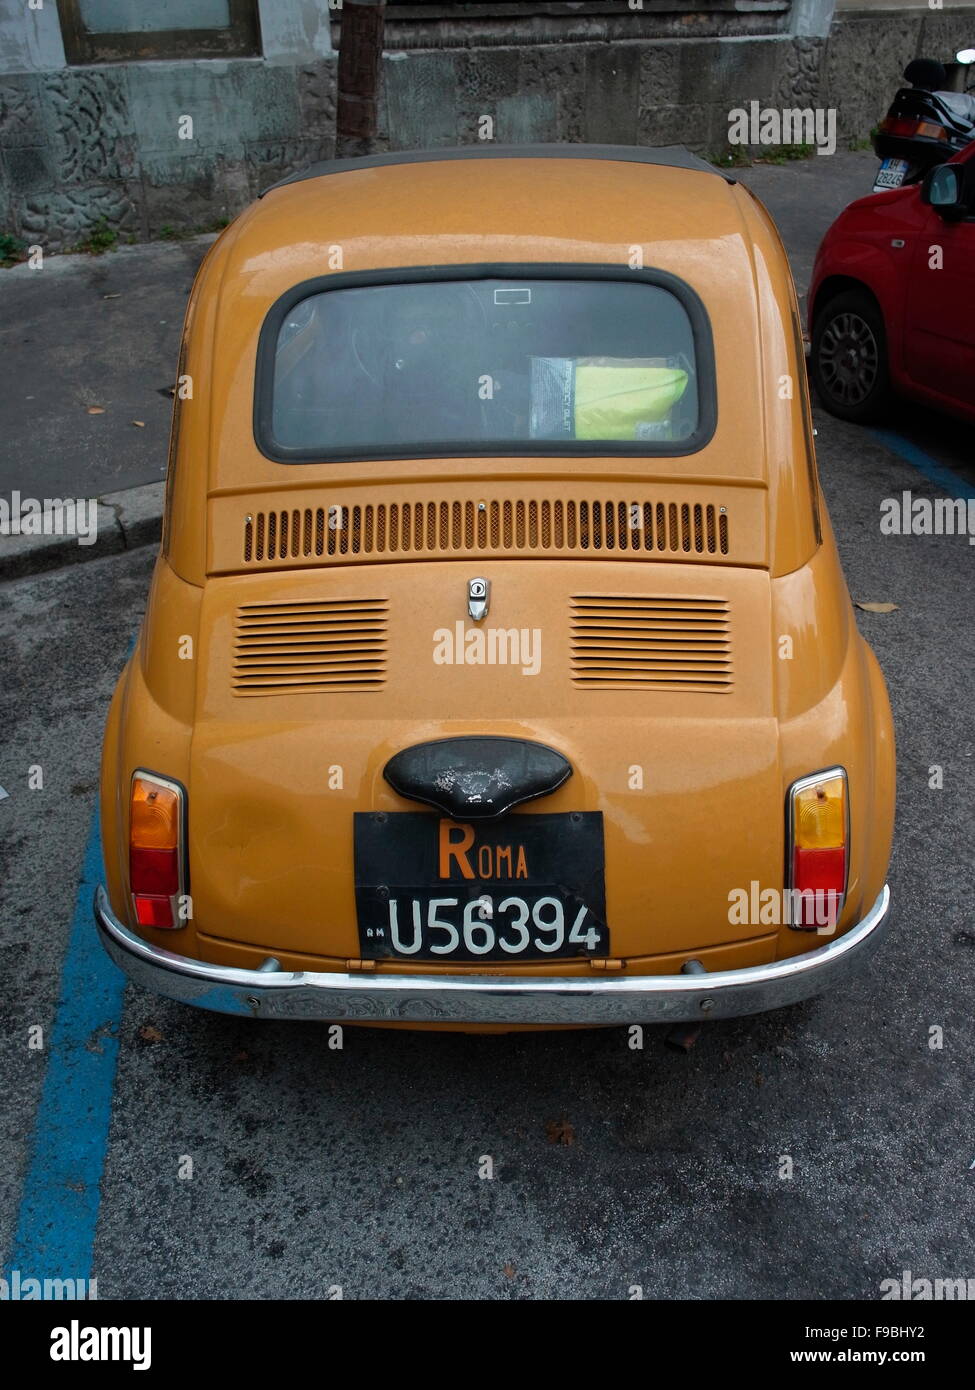 AJAXNETPHOTO. 2015. ROME, ITALY. - FIAT 500 CINQUECENTO - DANTE GIACOSA'S ORIGINAL 1957-1975 CITY CAR SALOON MODEL PARKED IN THE CITY. FIAT MADE MORE THAN 3MILLION OF THESE VEHICLES BEFORE PRODUCTION ENDED. PHOTO:JONATHAN EASTLAND/AJAX REF:GX151012 75886 Stock Photo